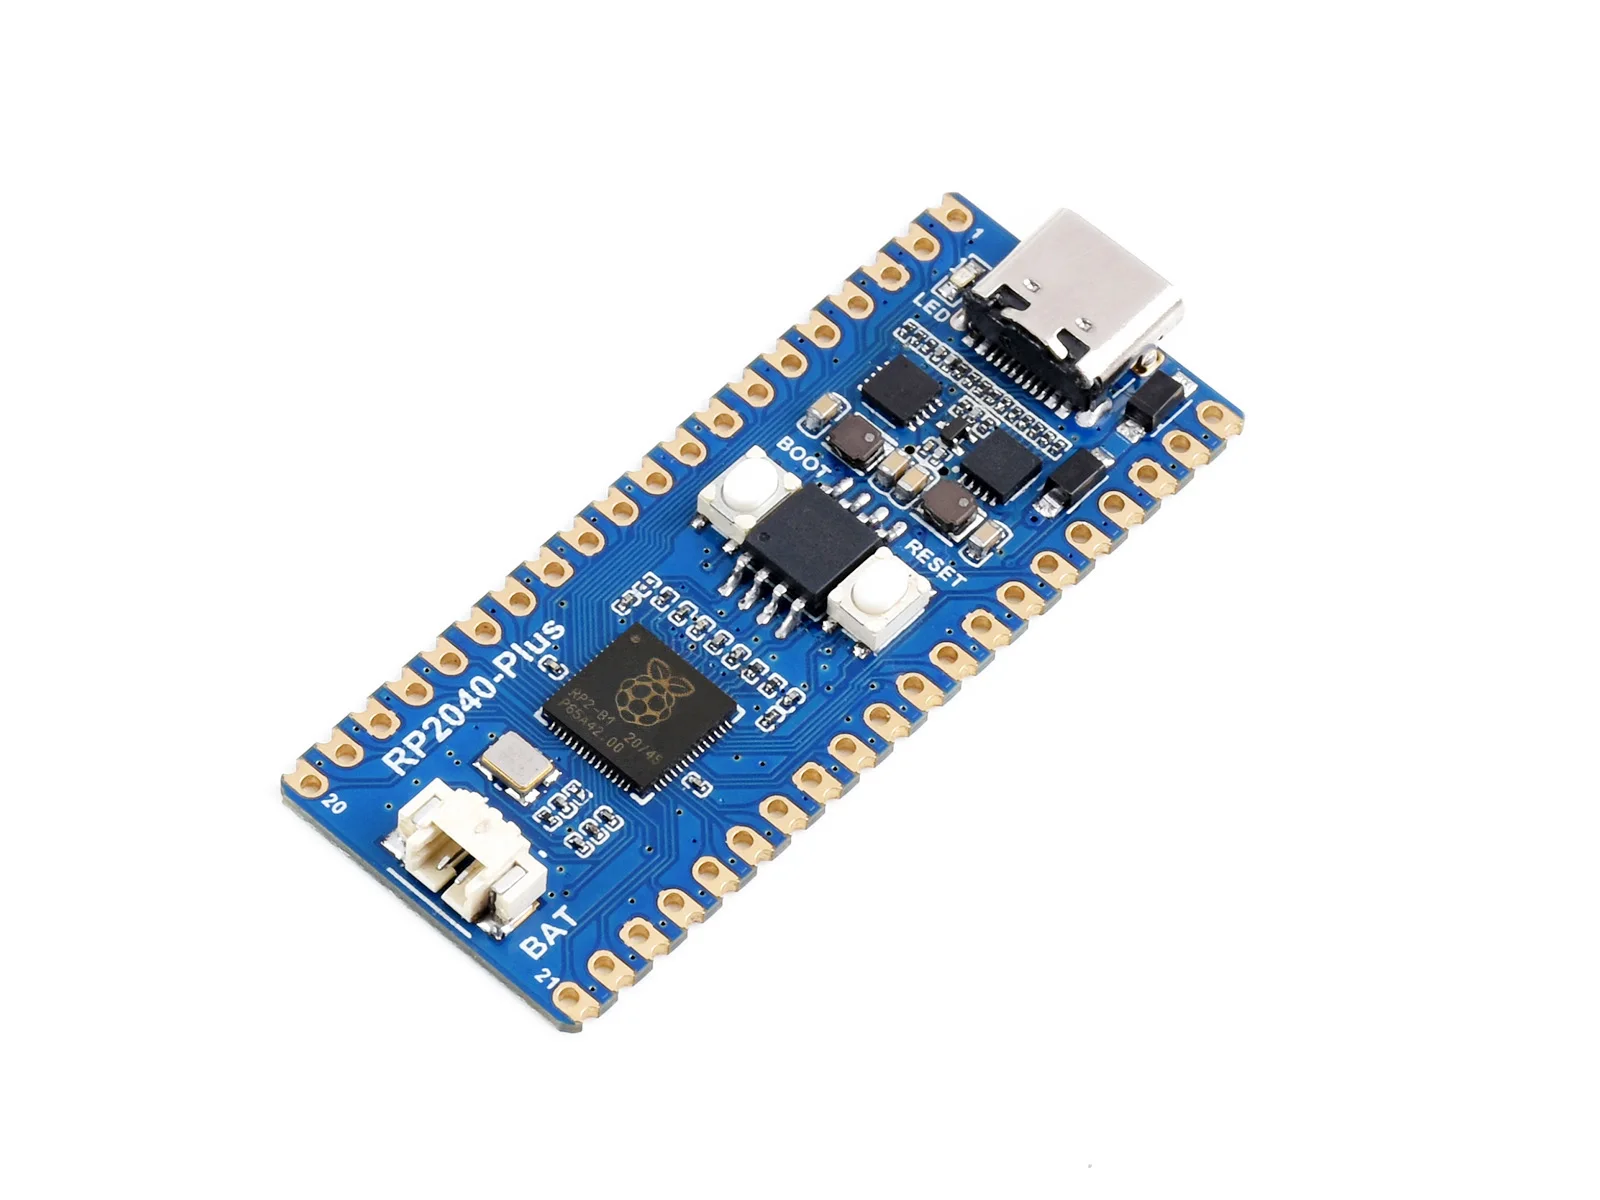 

Waveshare RP2040-Plus, A Low-Cost, High-Performance Pico-Like MCU Board Based On Raspberry Pi Microcontroller RP2040, Plus ver